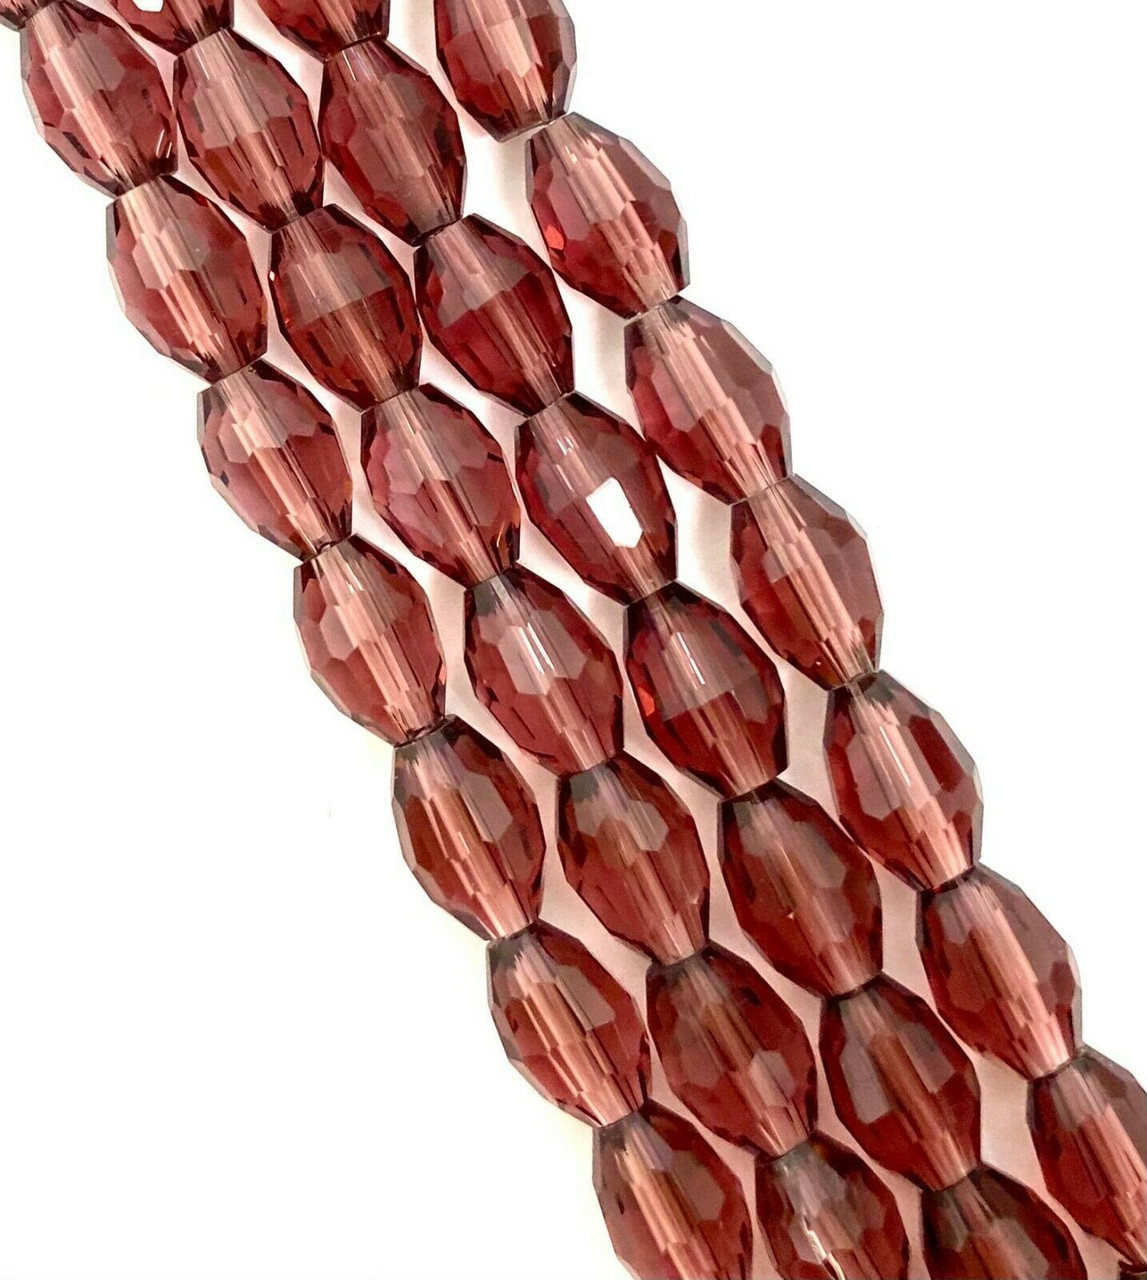 Strand of faceted rice glass beads - approx 6x4mm, PLUM, approx 72 beads